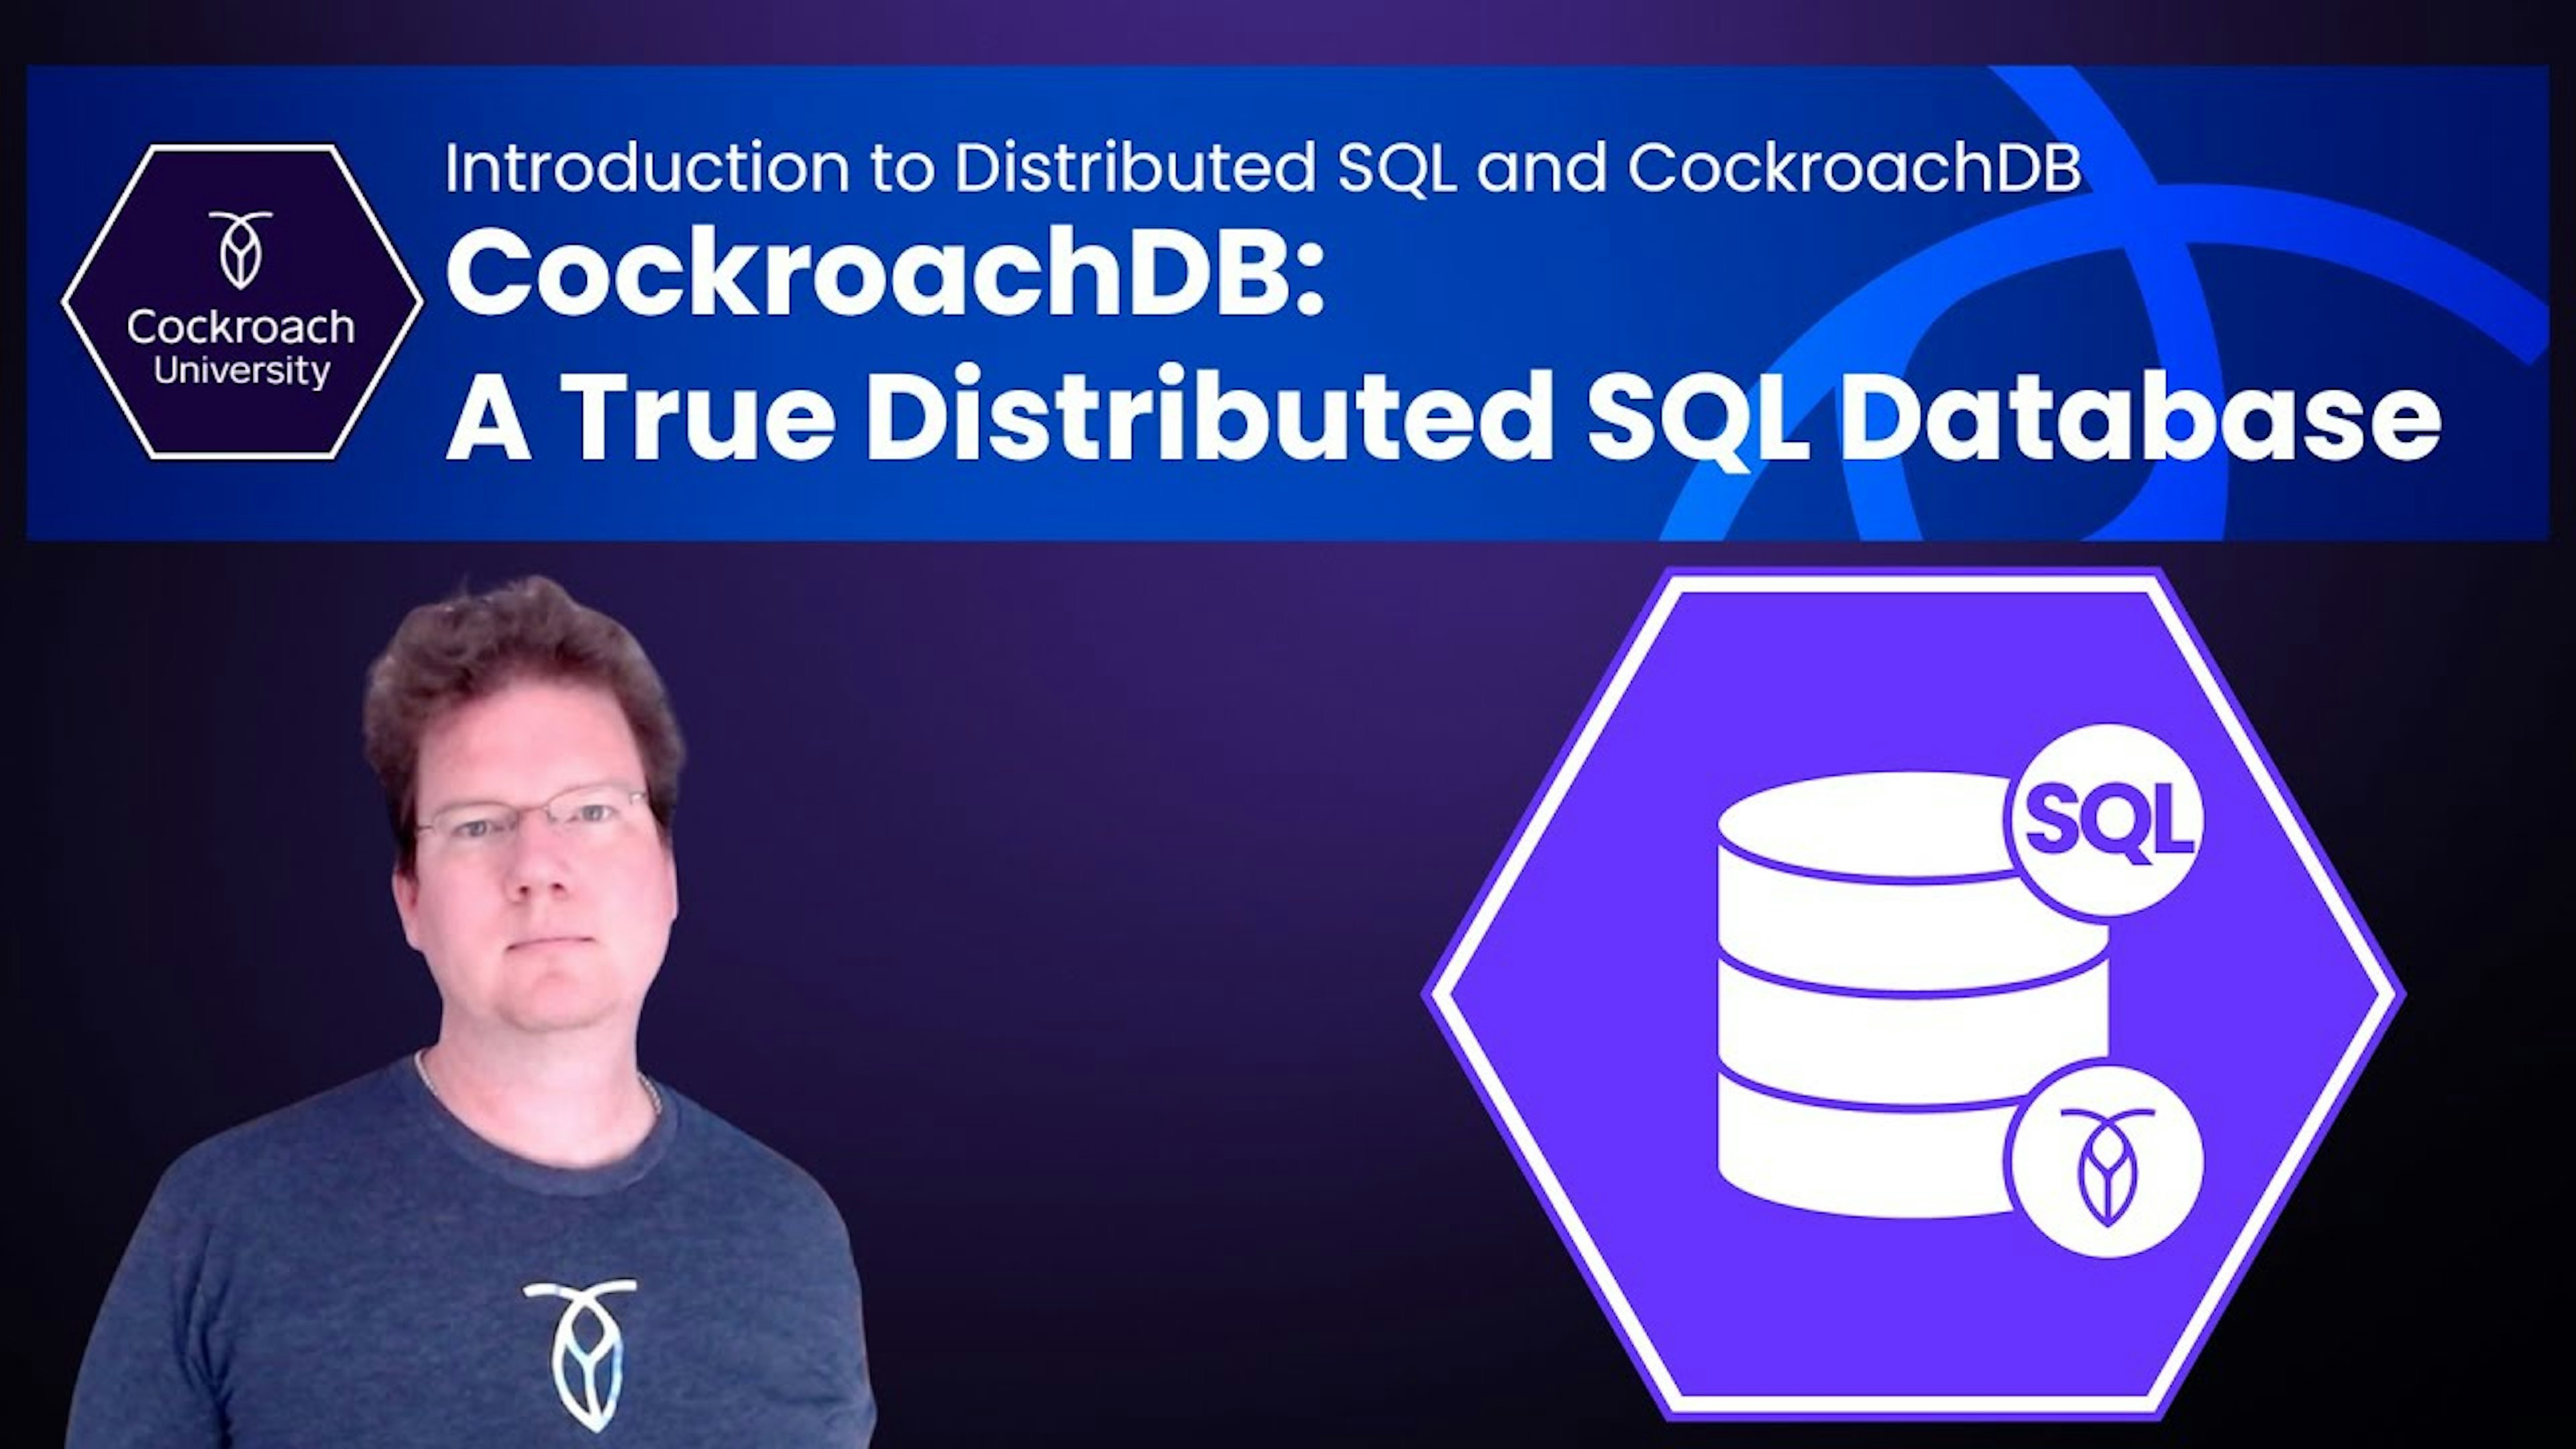 A True Distributed SQL Database